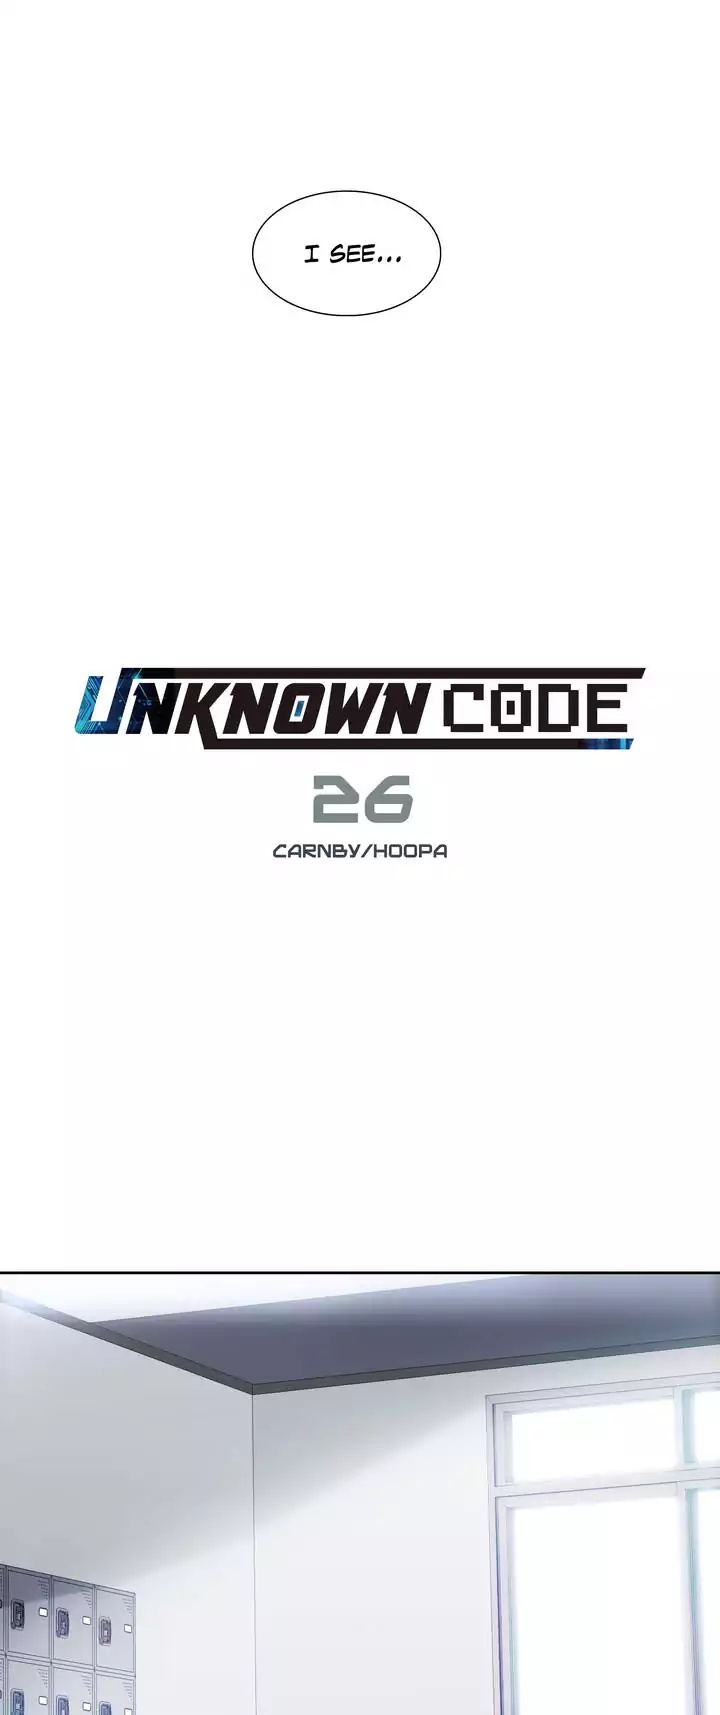 Unknown Code image